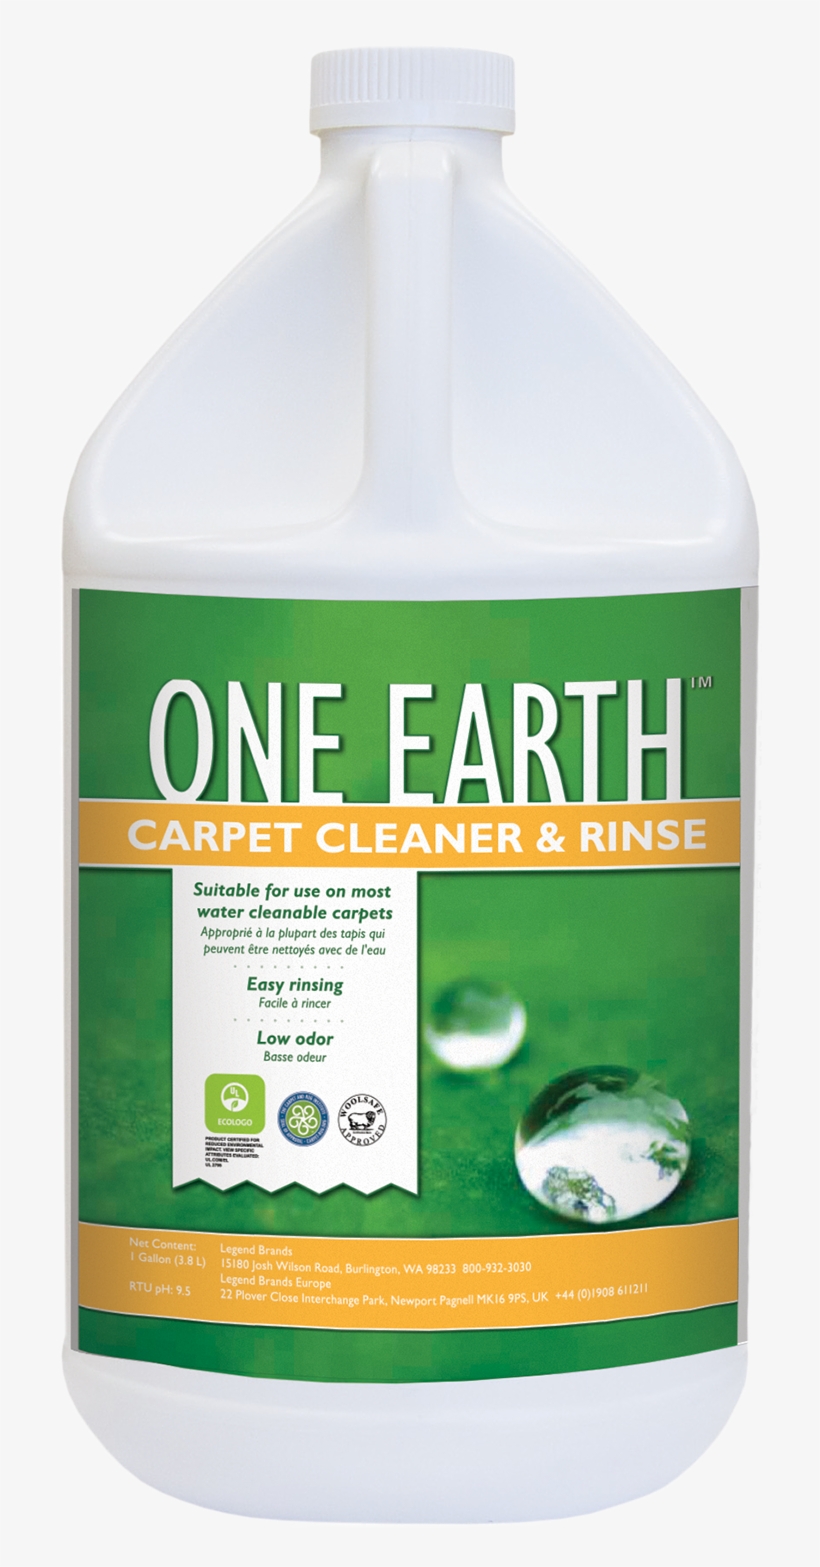 One Earth Carpet Cleaner And Rinse - Chemspec Enzyme Carpet Shampoo, transparent png #6480139